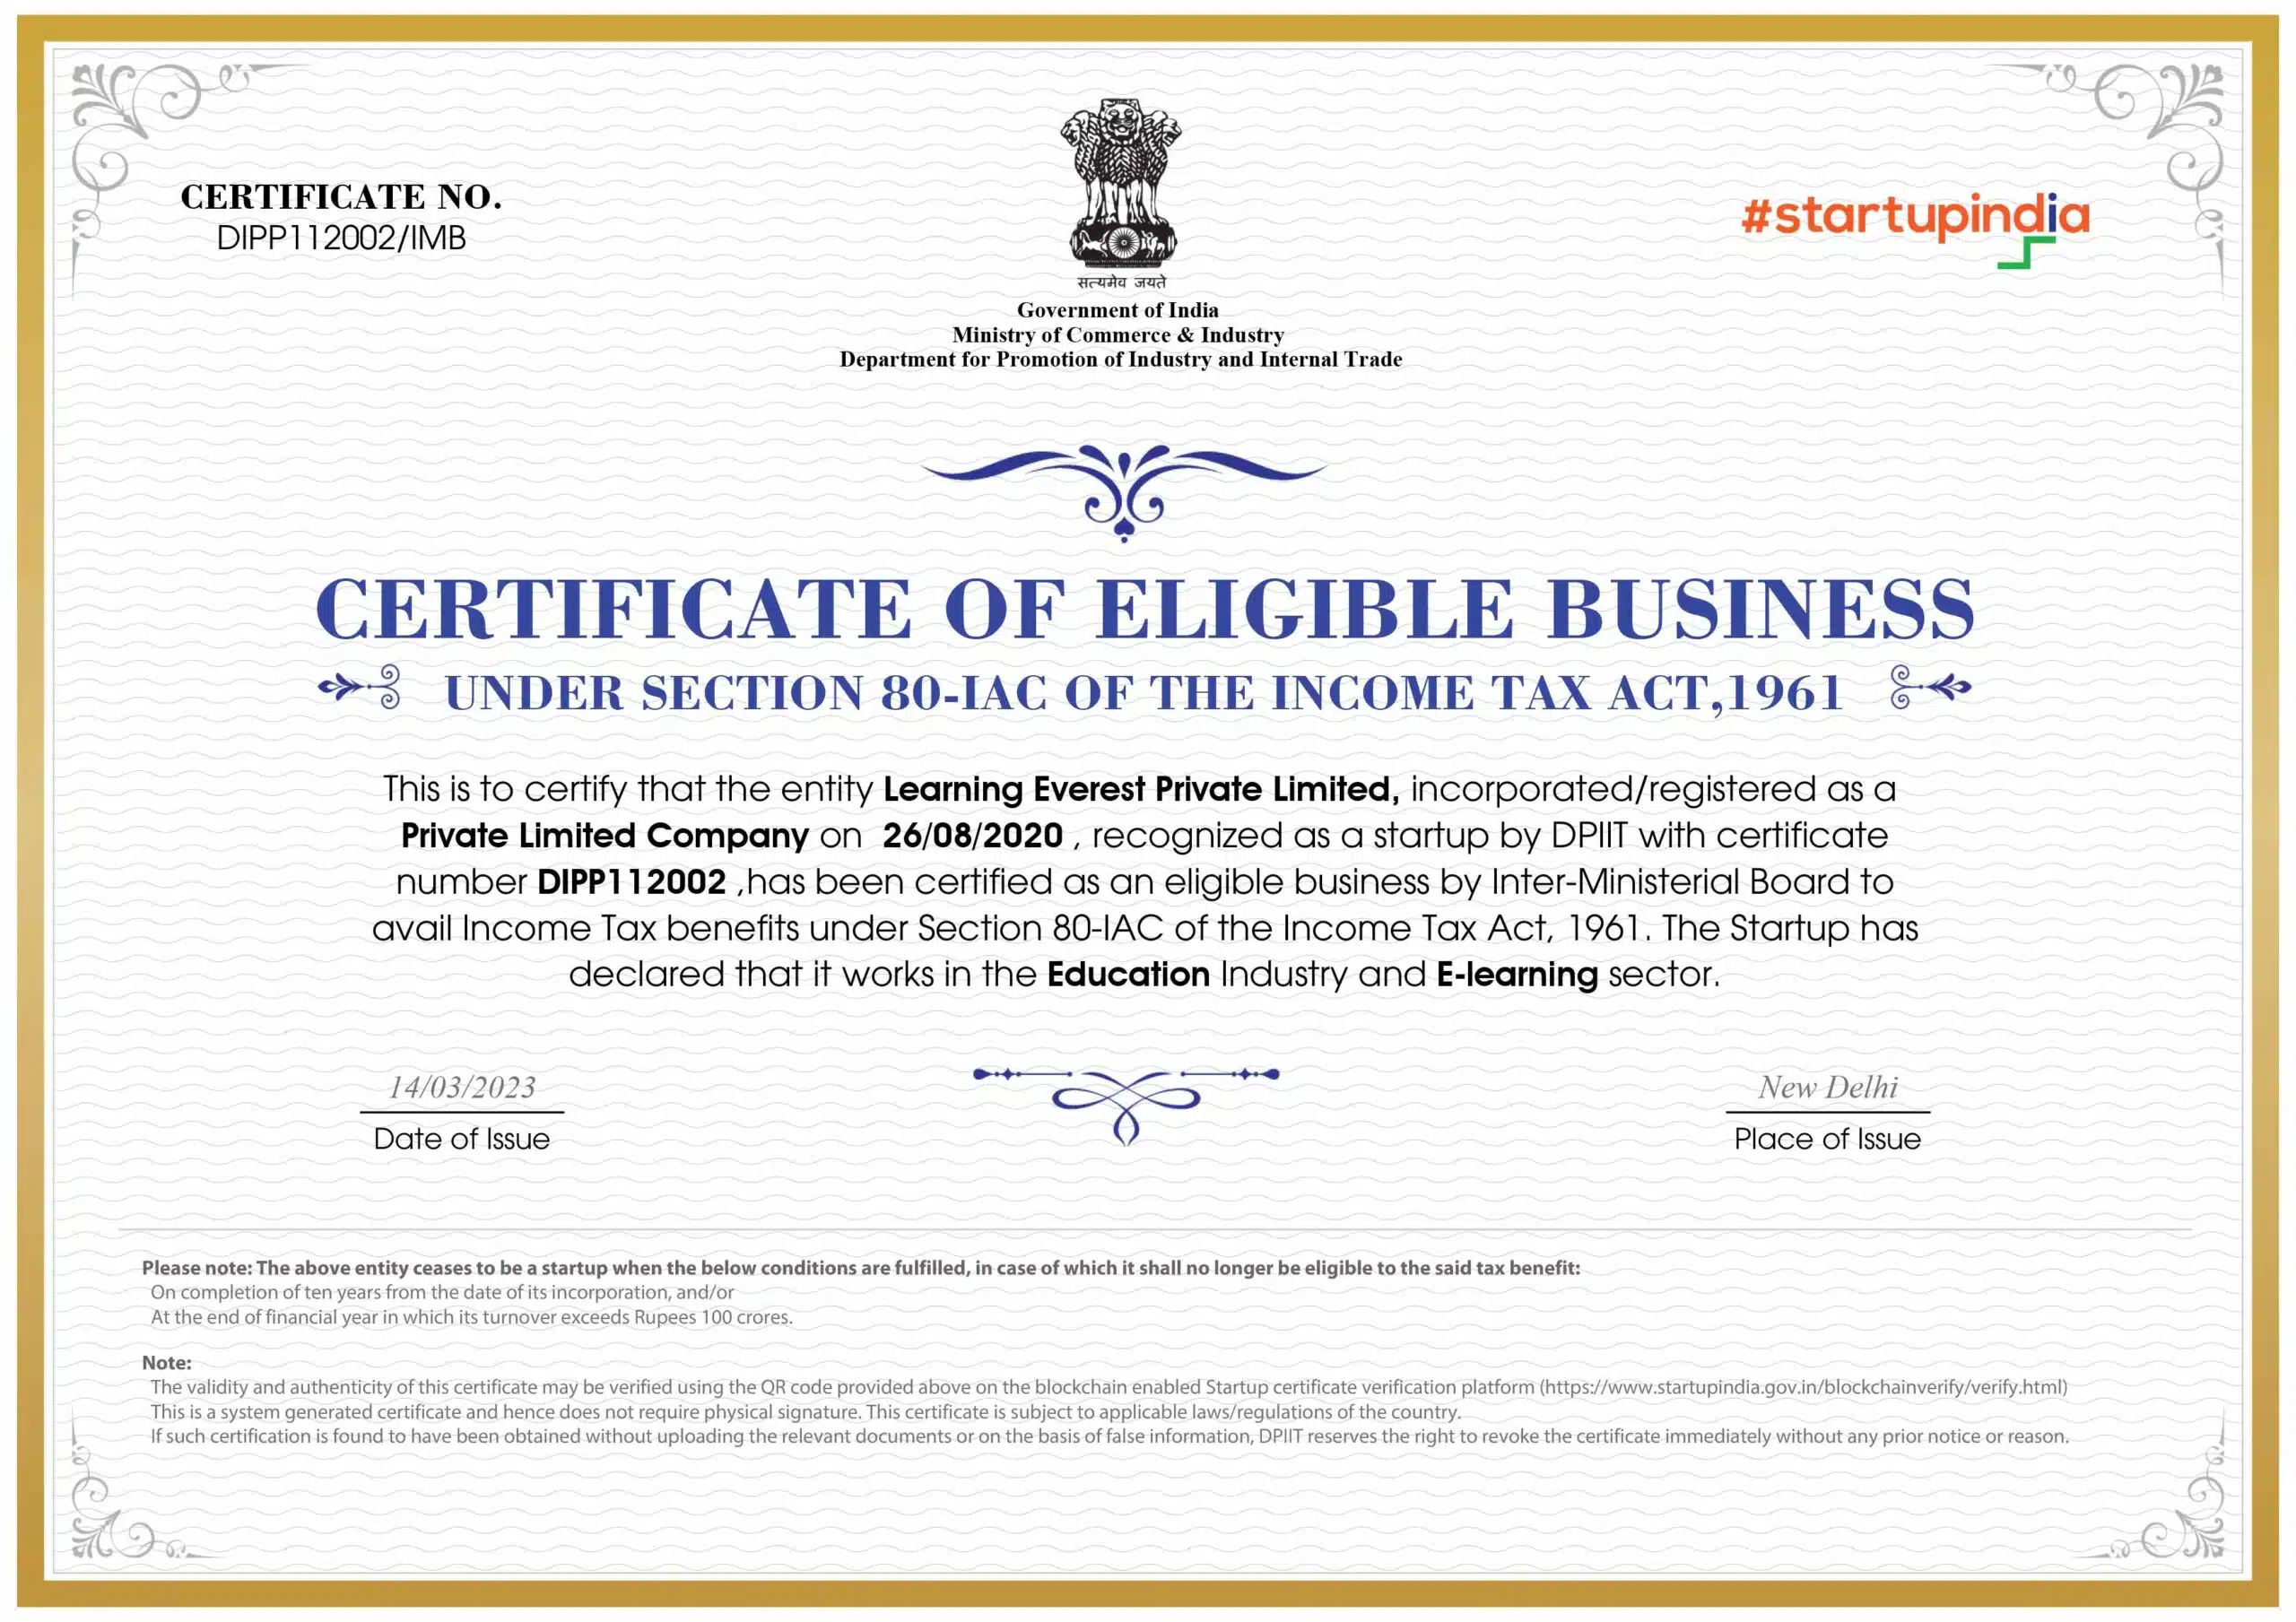 Certificate of Eligible Business - Learning Everest Private Limited